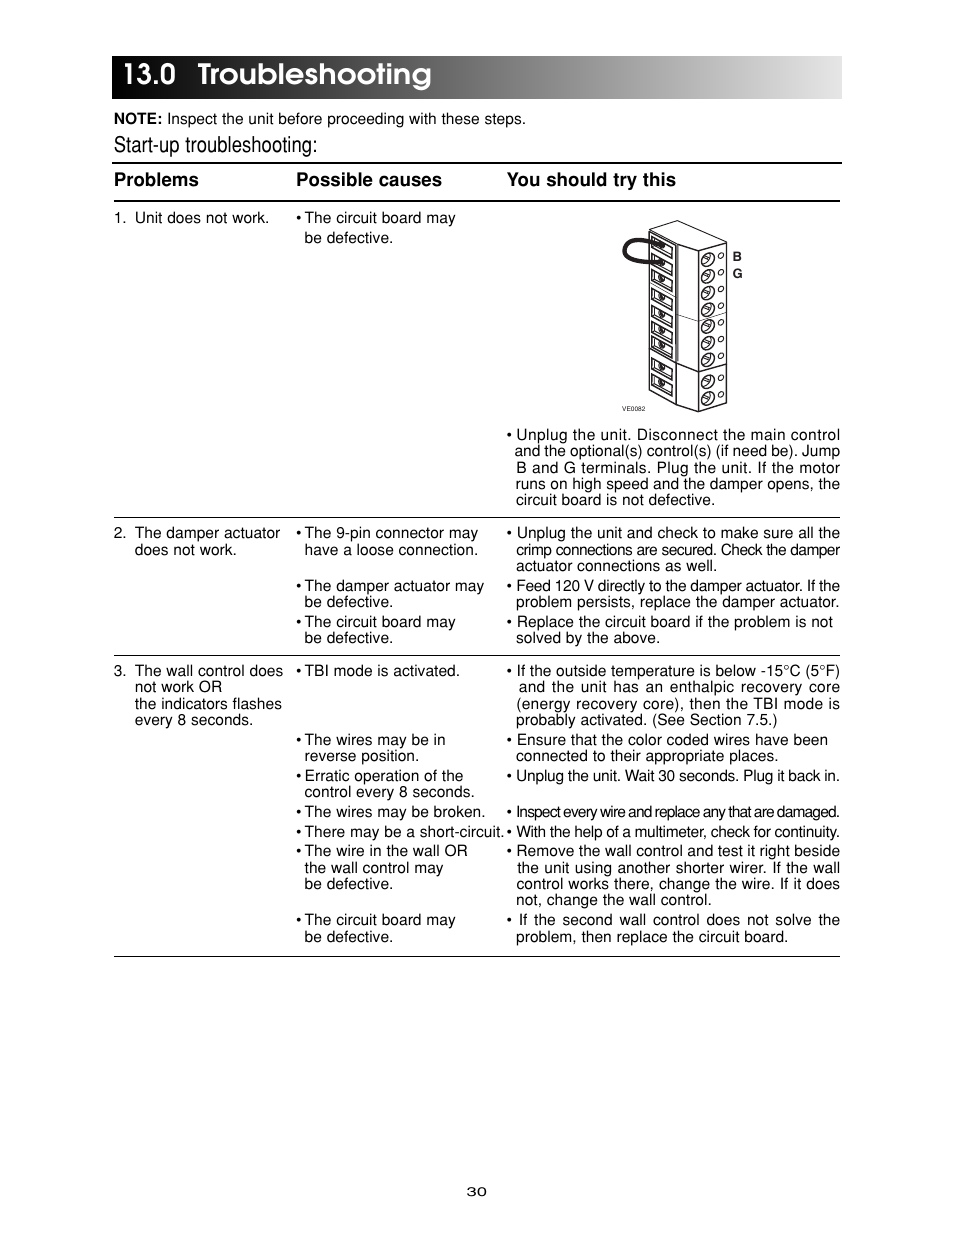 0 troubleshooting, Start-up troubleshooting | Maytag Ventilation Systems HRV-210 User Manual | Page 30 / 32